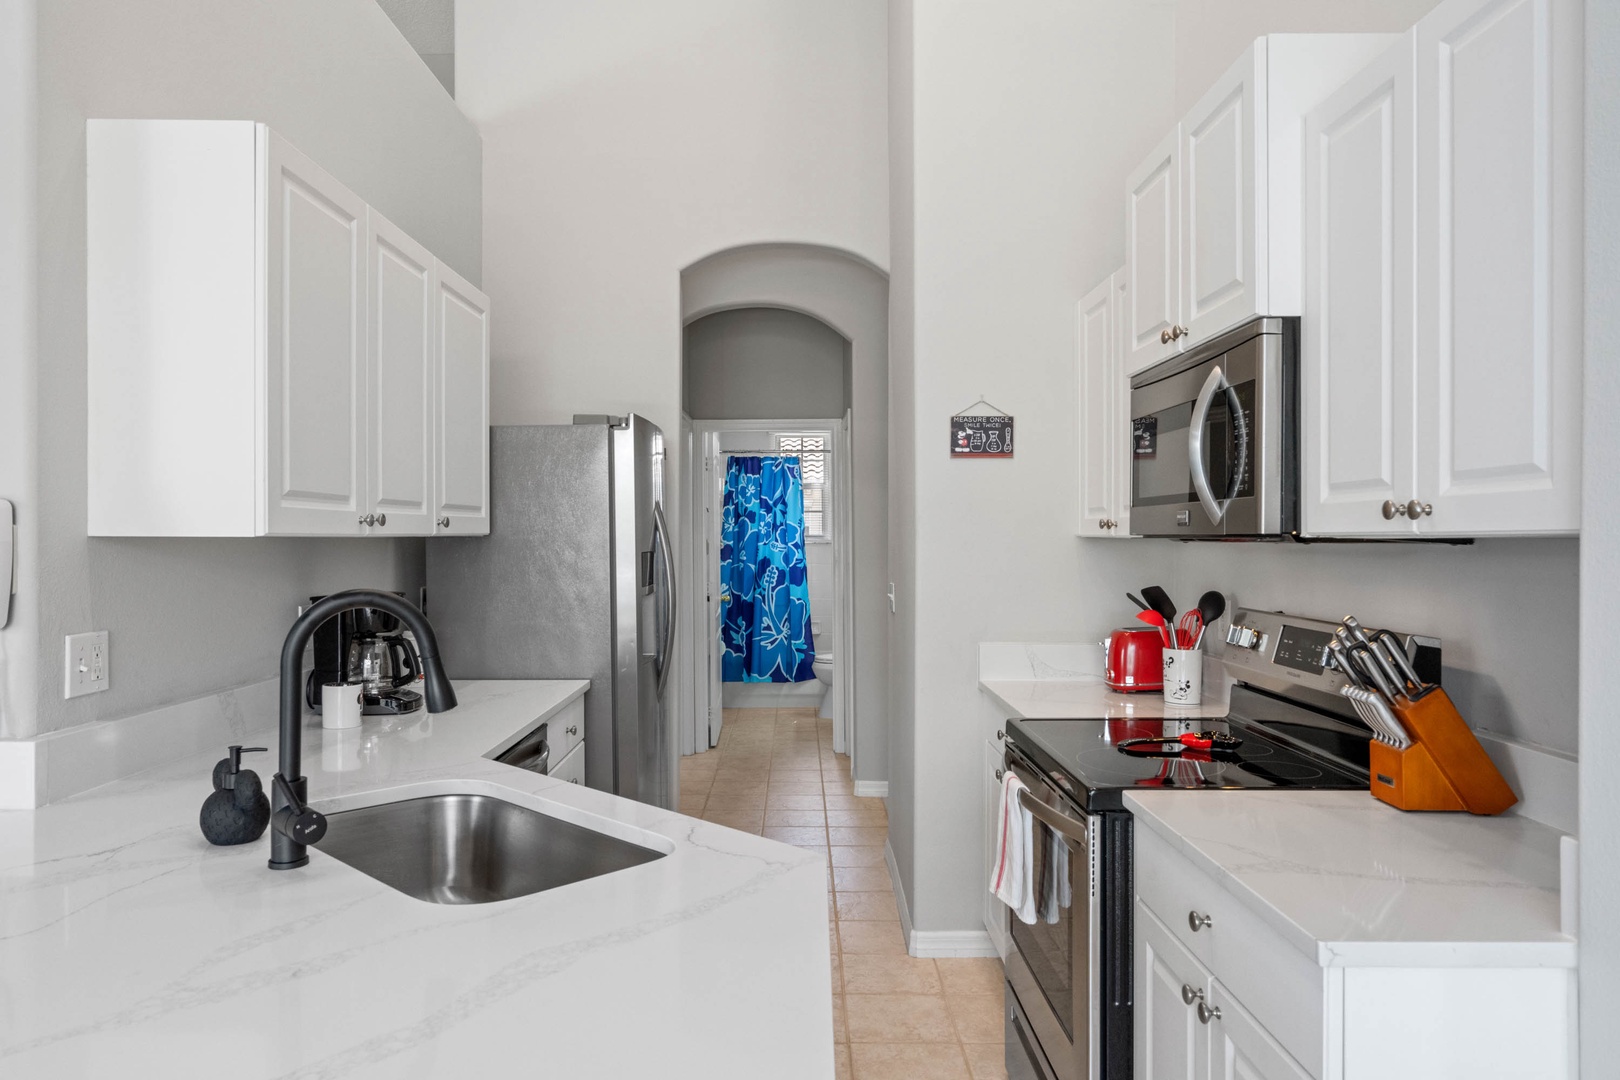 The sleek kitchen offers fantastic amenities and plenty of counter space